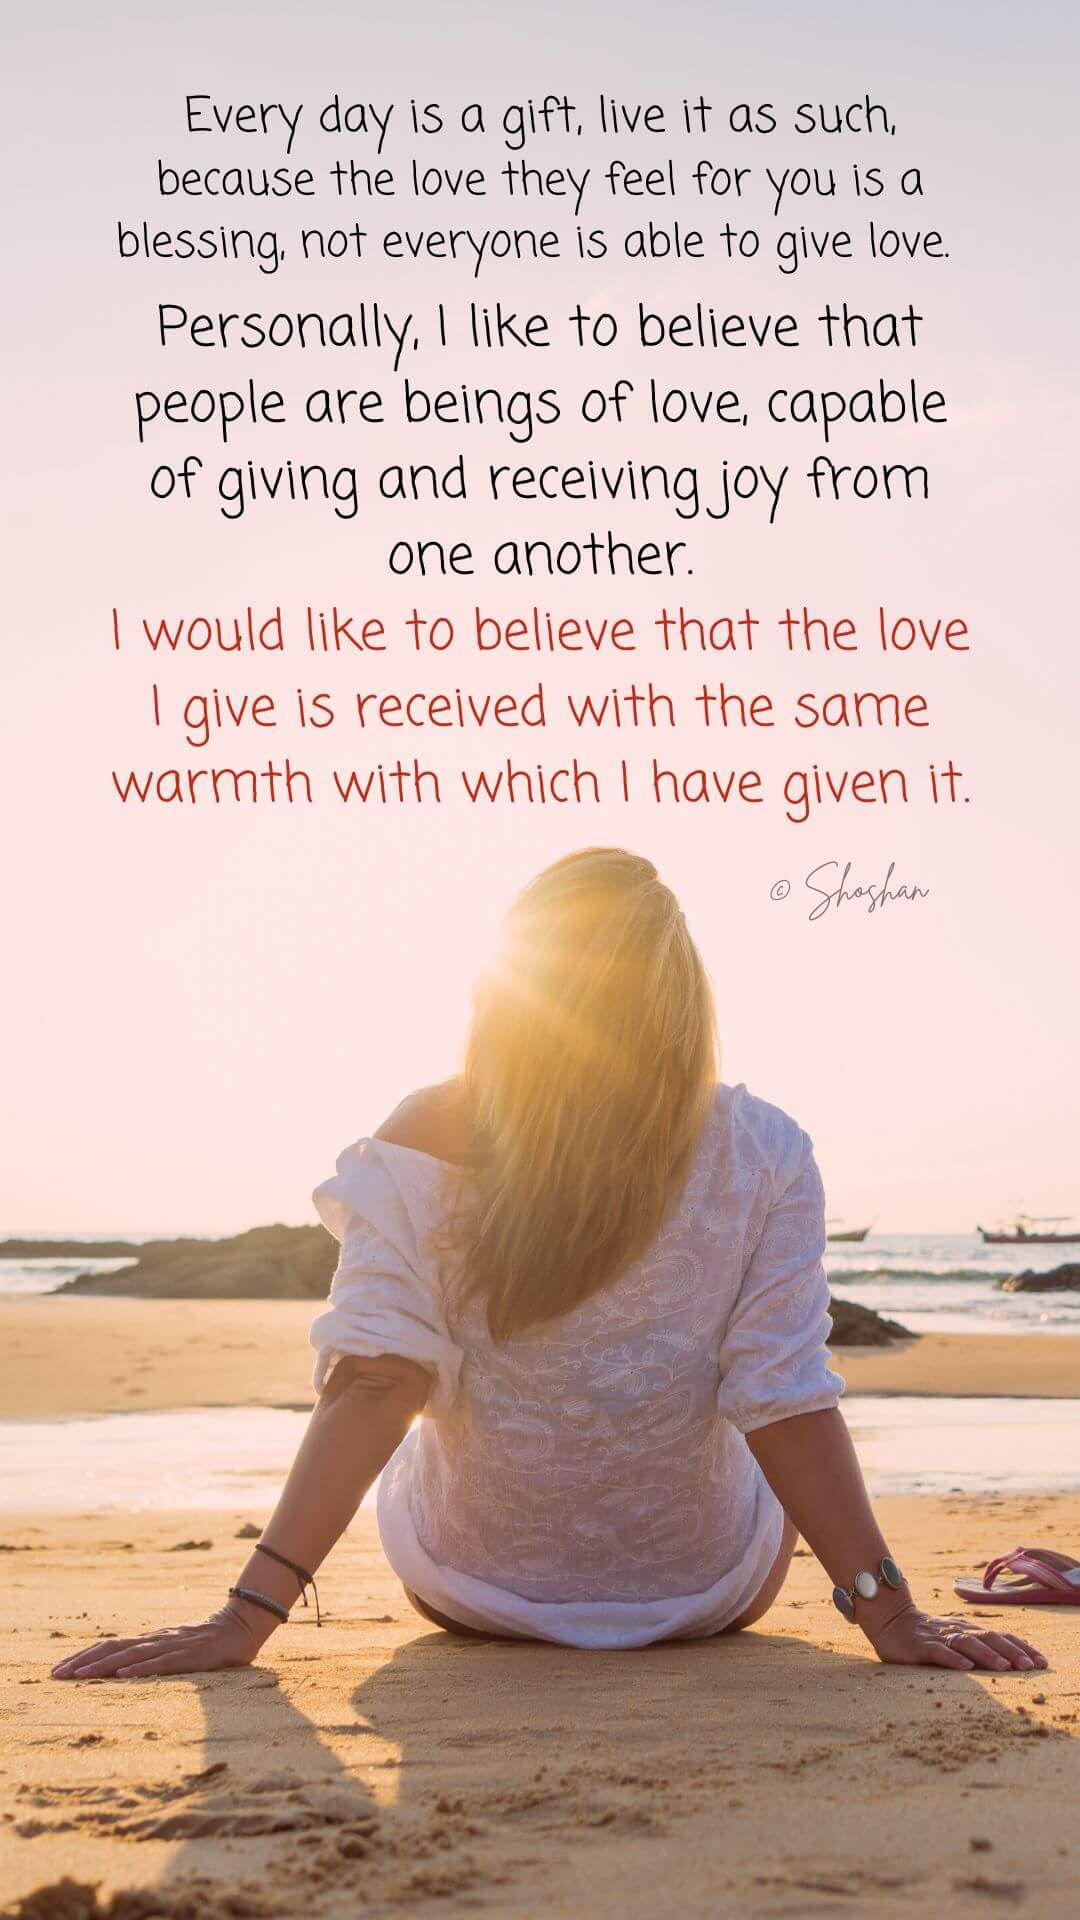 What I'd like to believe about the love I give away